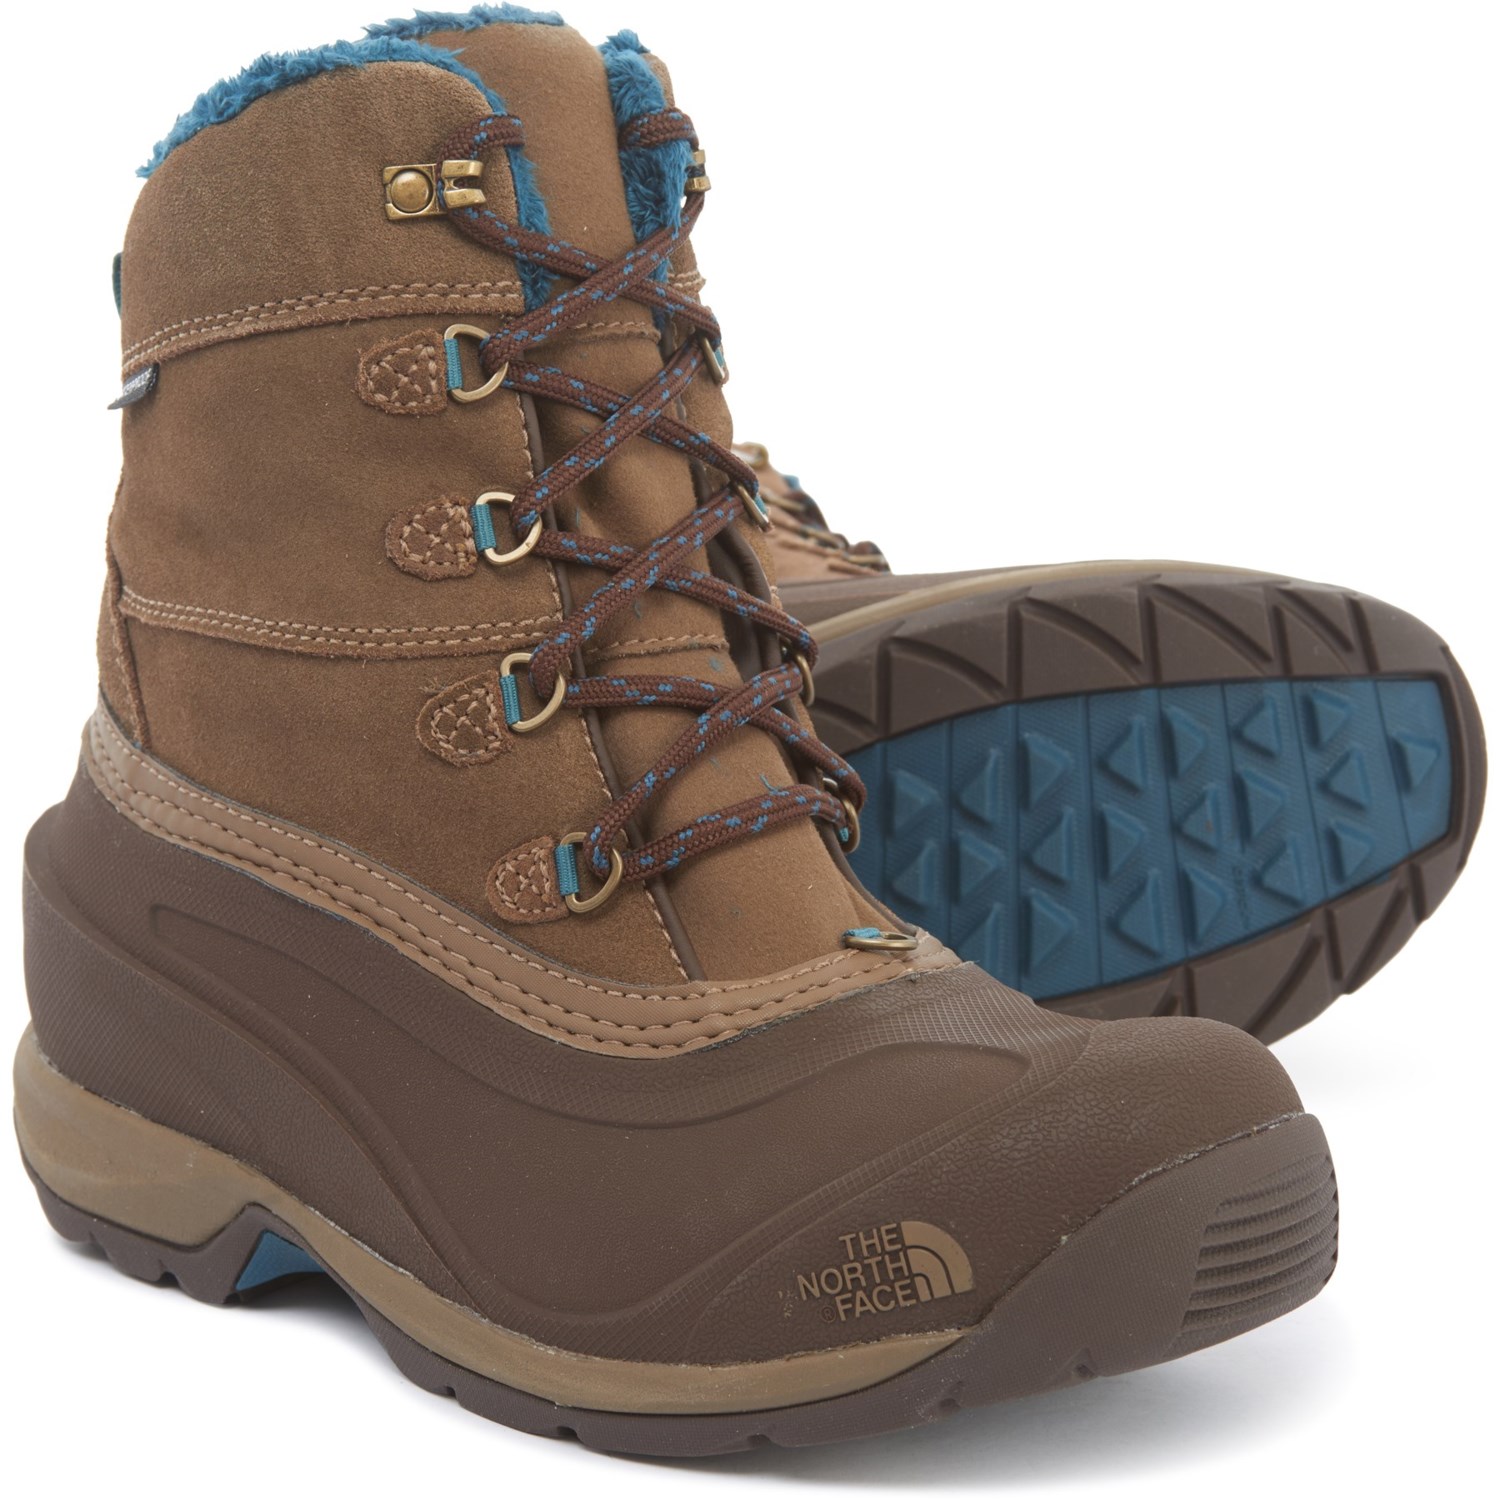 North Face Chilkat III Lace-Up Boots 